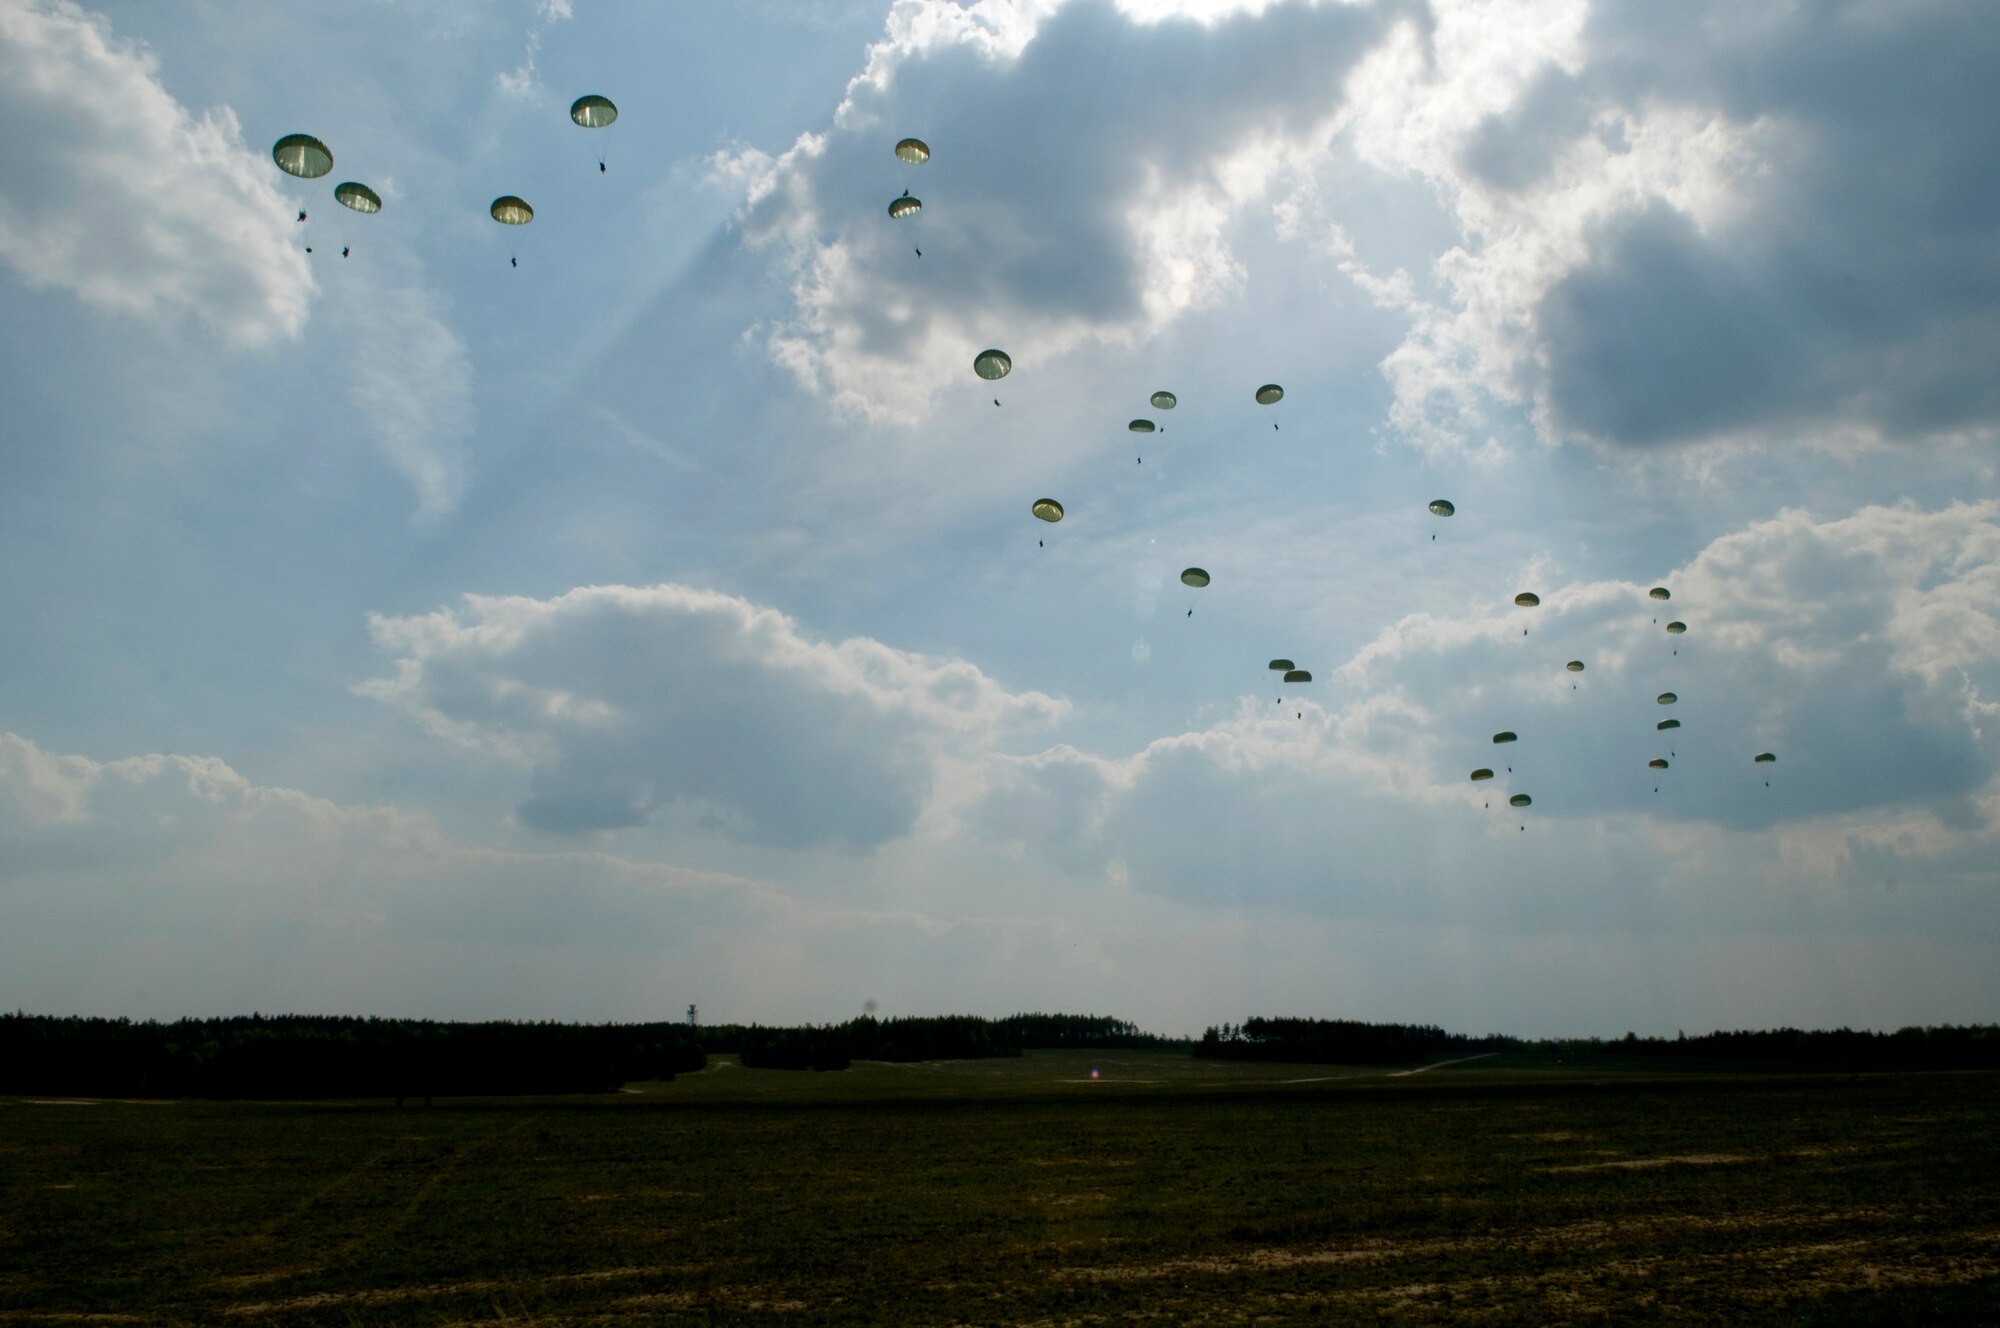 Members of the U.S. Army 173rd Airborne Brigade Combat Team float safely the ground after jumping out of a C-130E Hercules, April 22, 2009, Grafenwoehr Army Airfield, Germany. This is the last large combat training drop for a C-130E in Germany. (U.S. Air Force photo by Senior Airman Nathan Lipscomb)